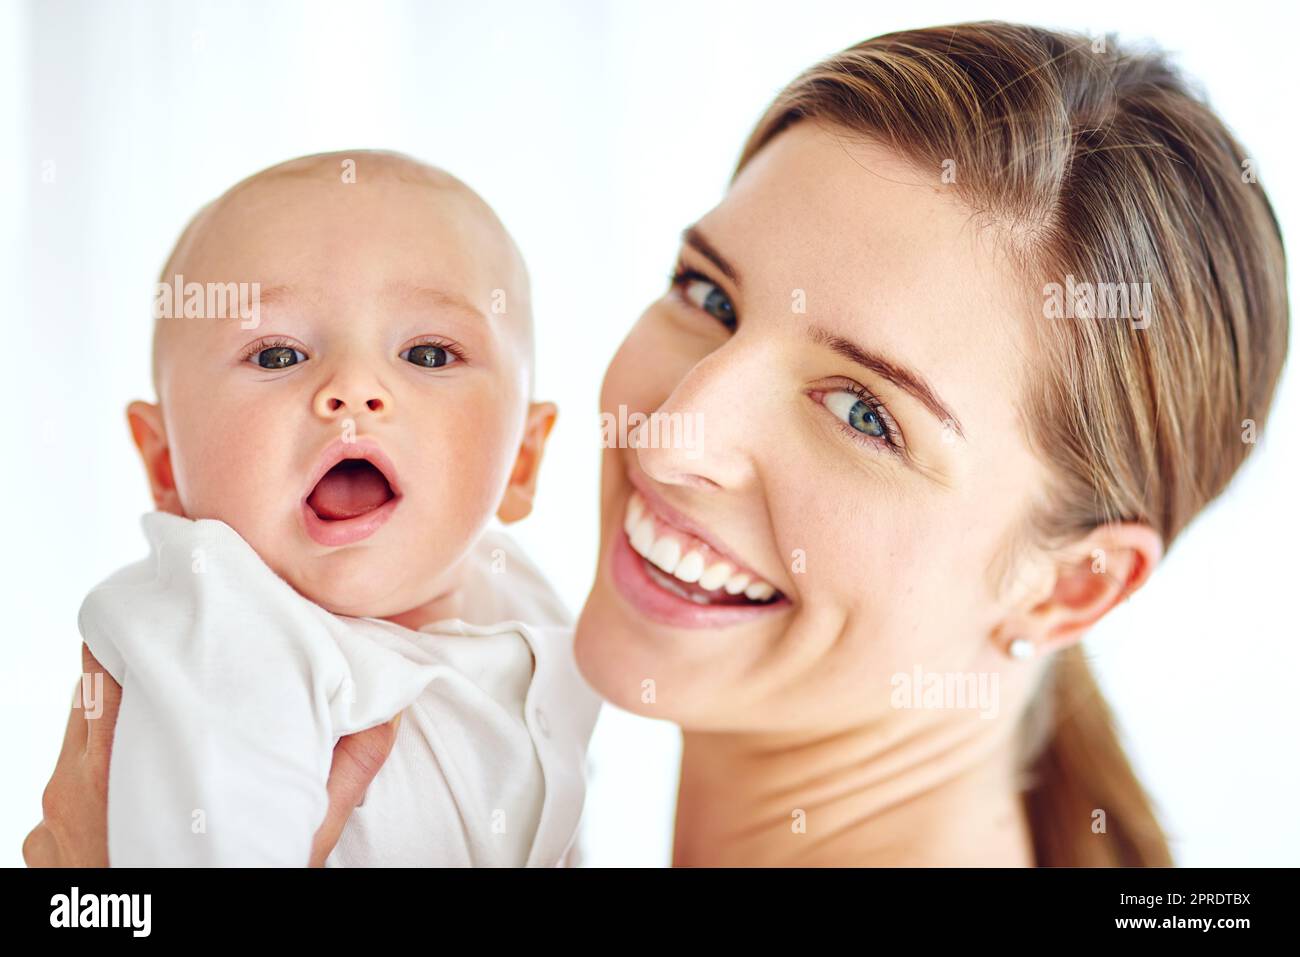 Cute, adorable baby bonding with mother enjoying quality playtime together at home. Proud, loving and happy woman holding her little newborn child while bonding together against a white background Stock Photo